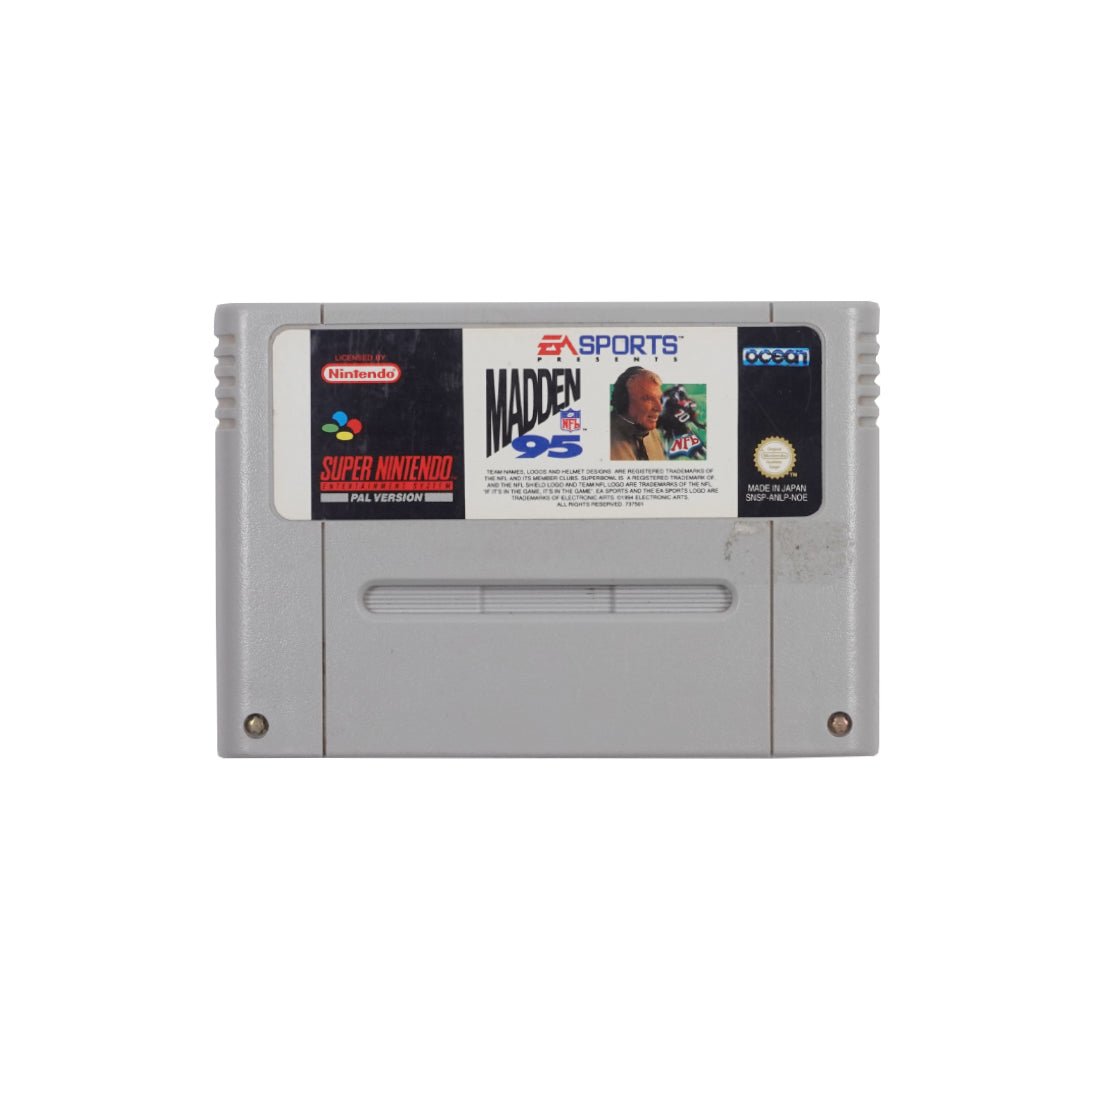 (Pre-Owned) Madden 95 - Super Nintendo Entertainment System - Store 974 | ستور ٩٧٤